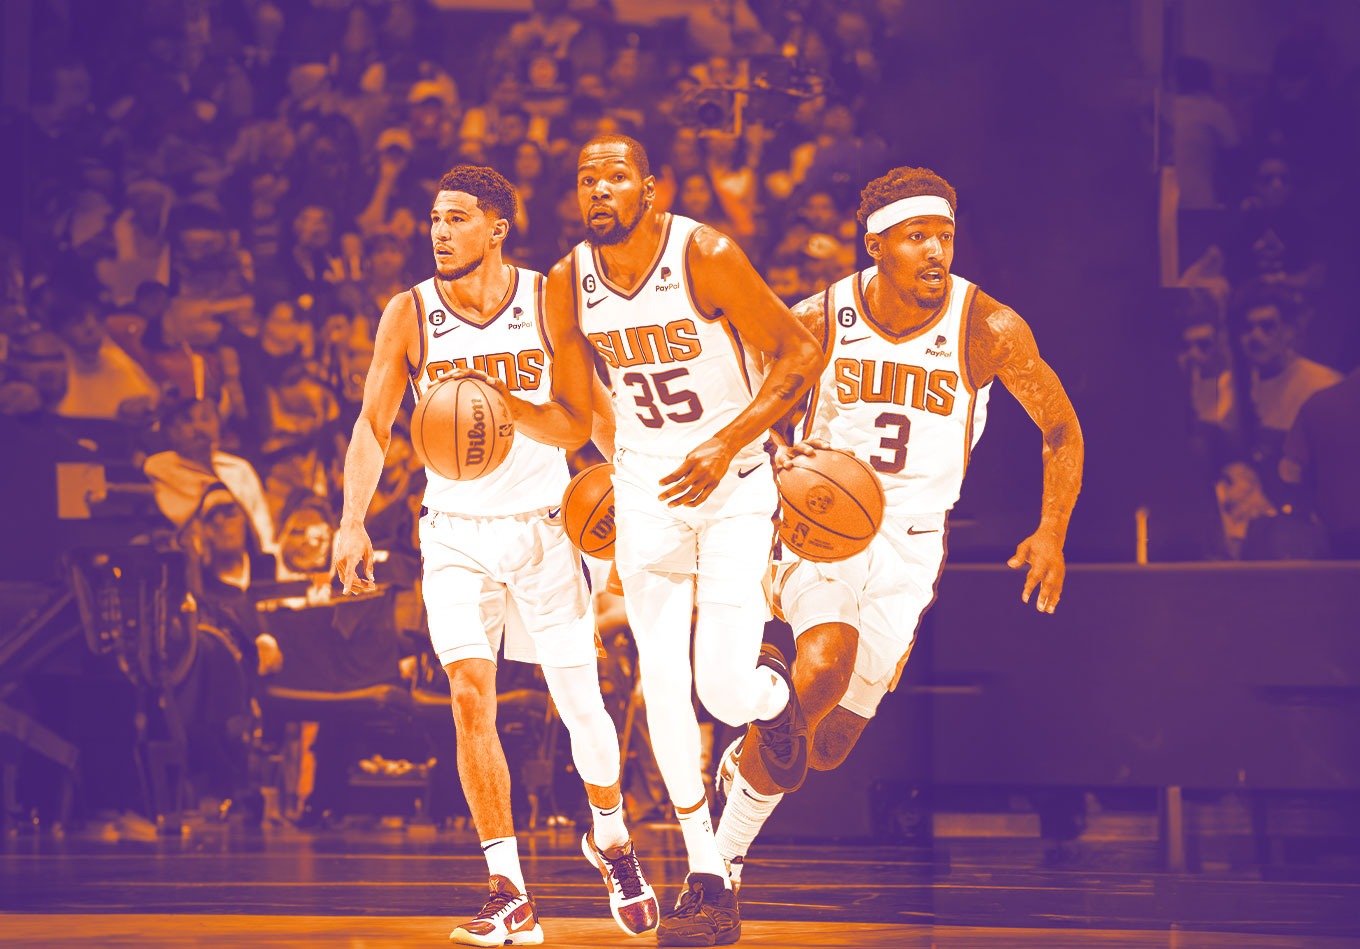 Stacking Stars: Does the Bradley Beal Trade Make the Suns Title Contenders?